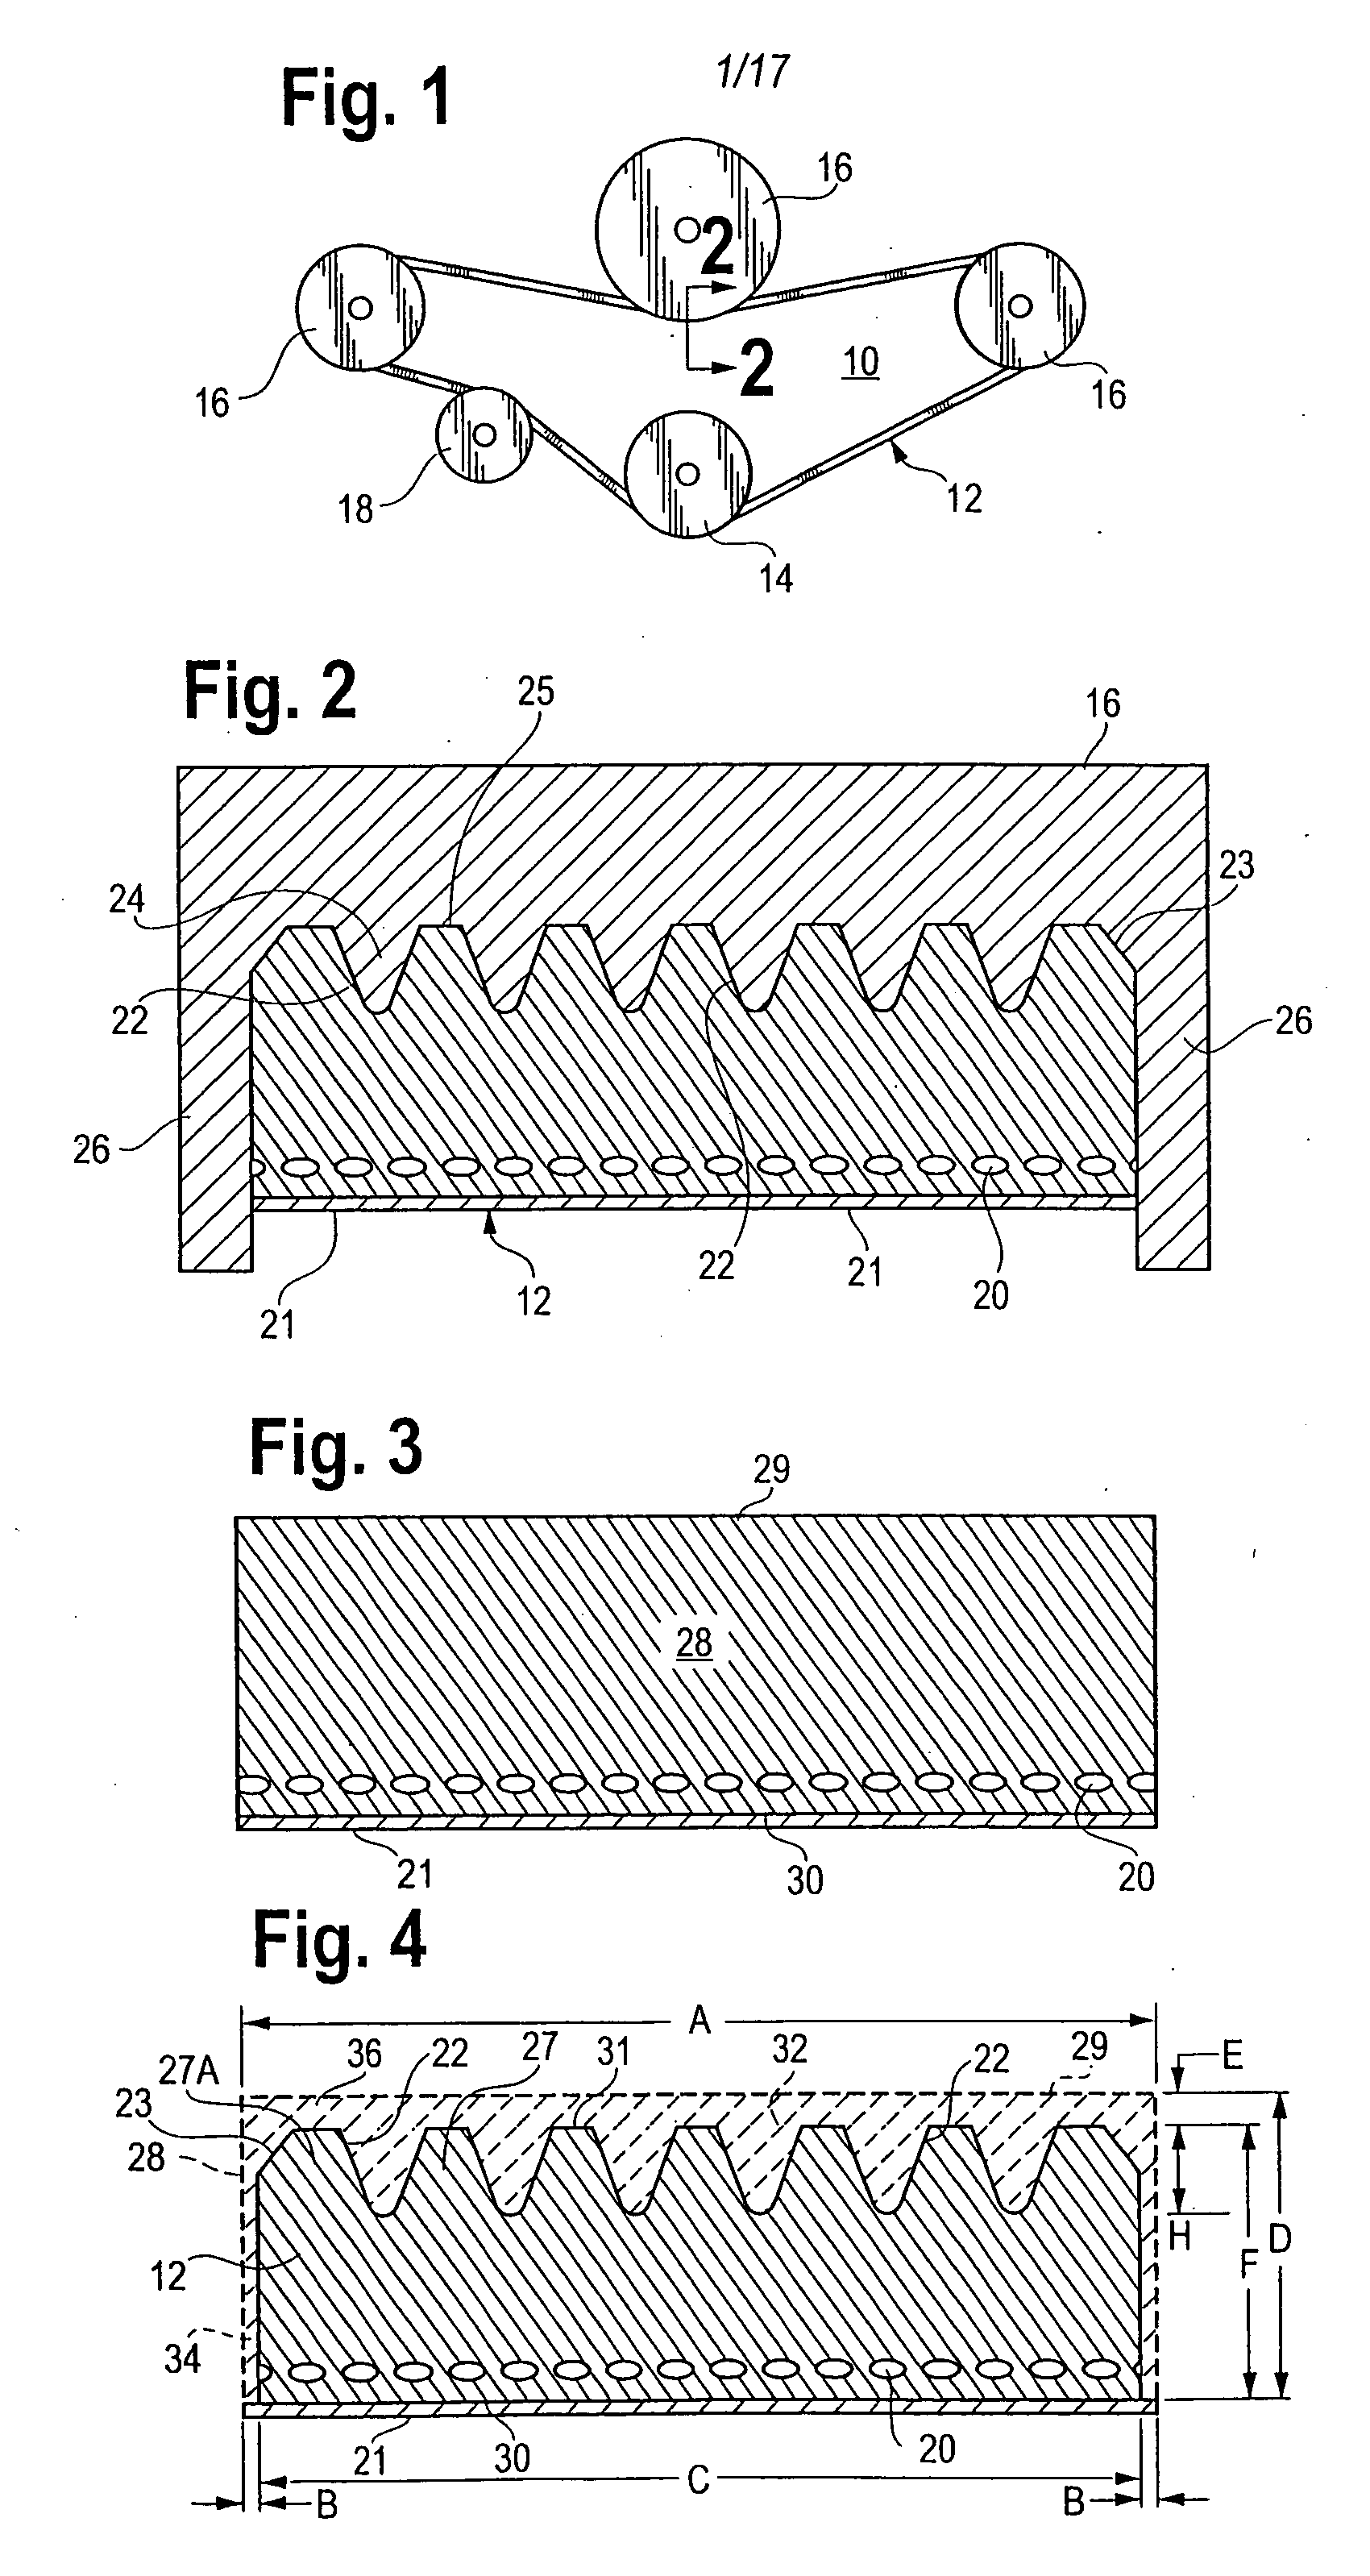 Method of fabricating pliant workpieces, tools for performing the method and methods for making those tools